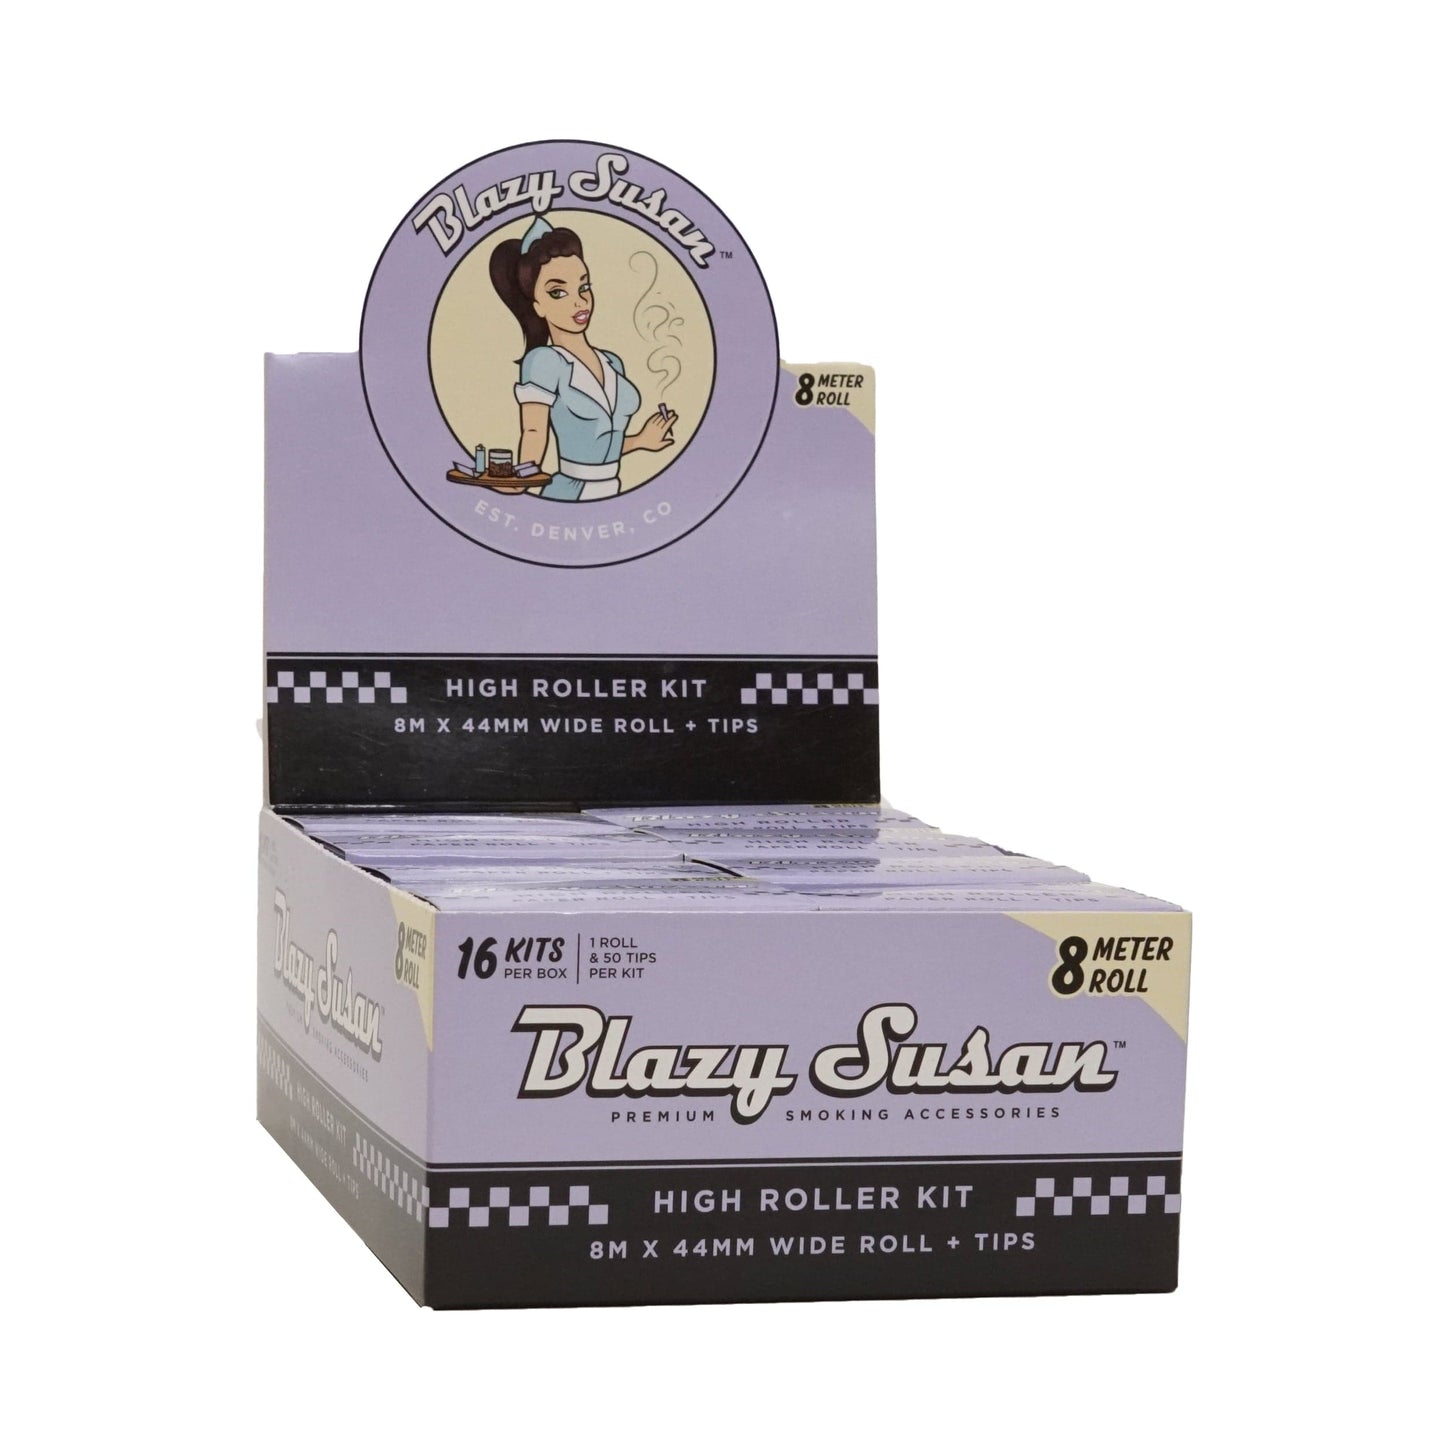 Blazy Susan Rolling Papers High Roller Kit Blazy Susan Purple Rolling Papers